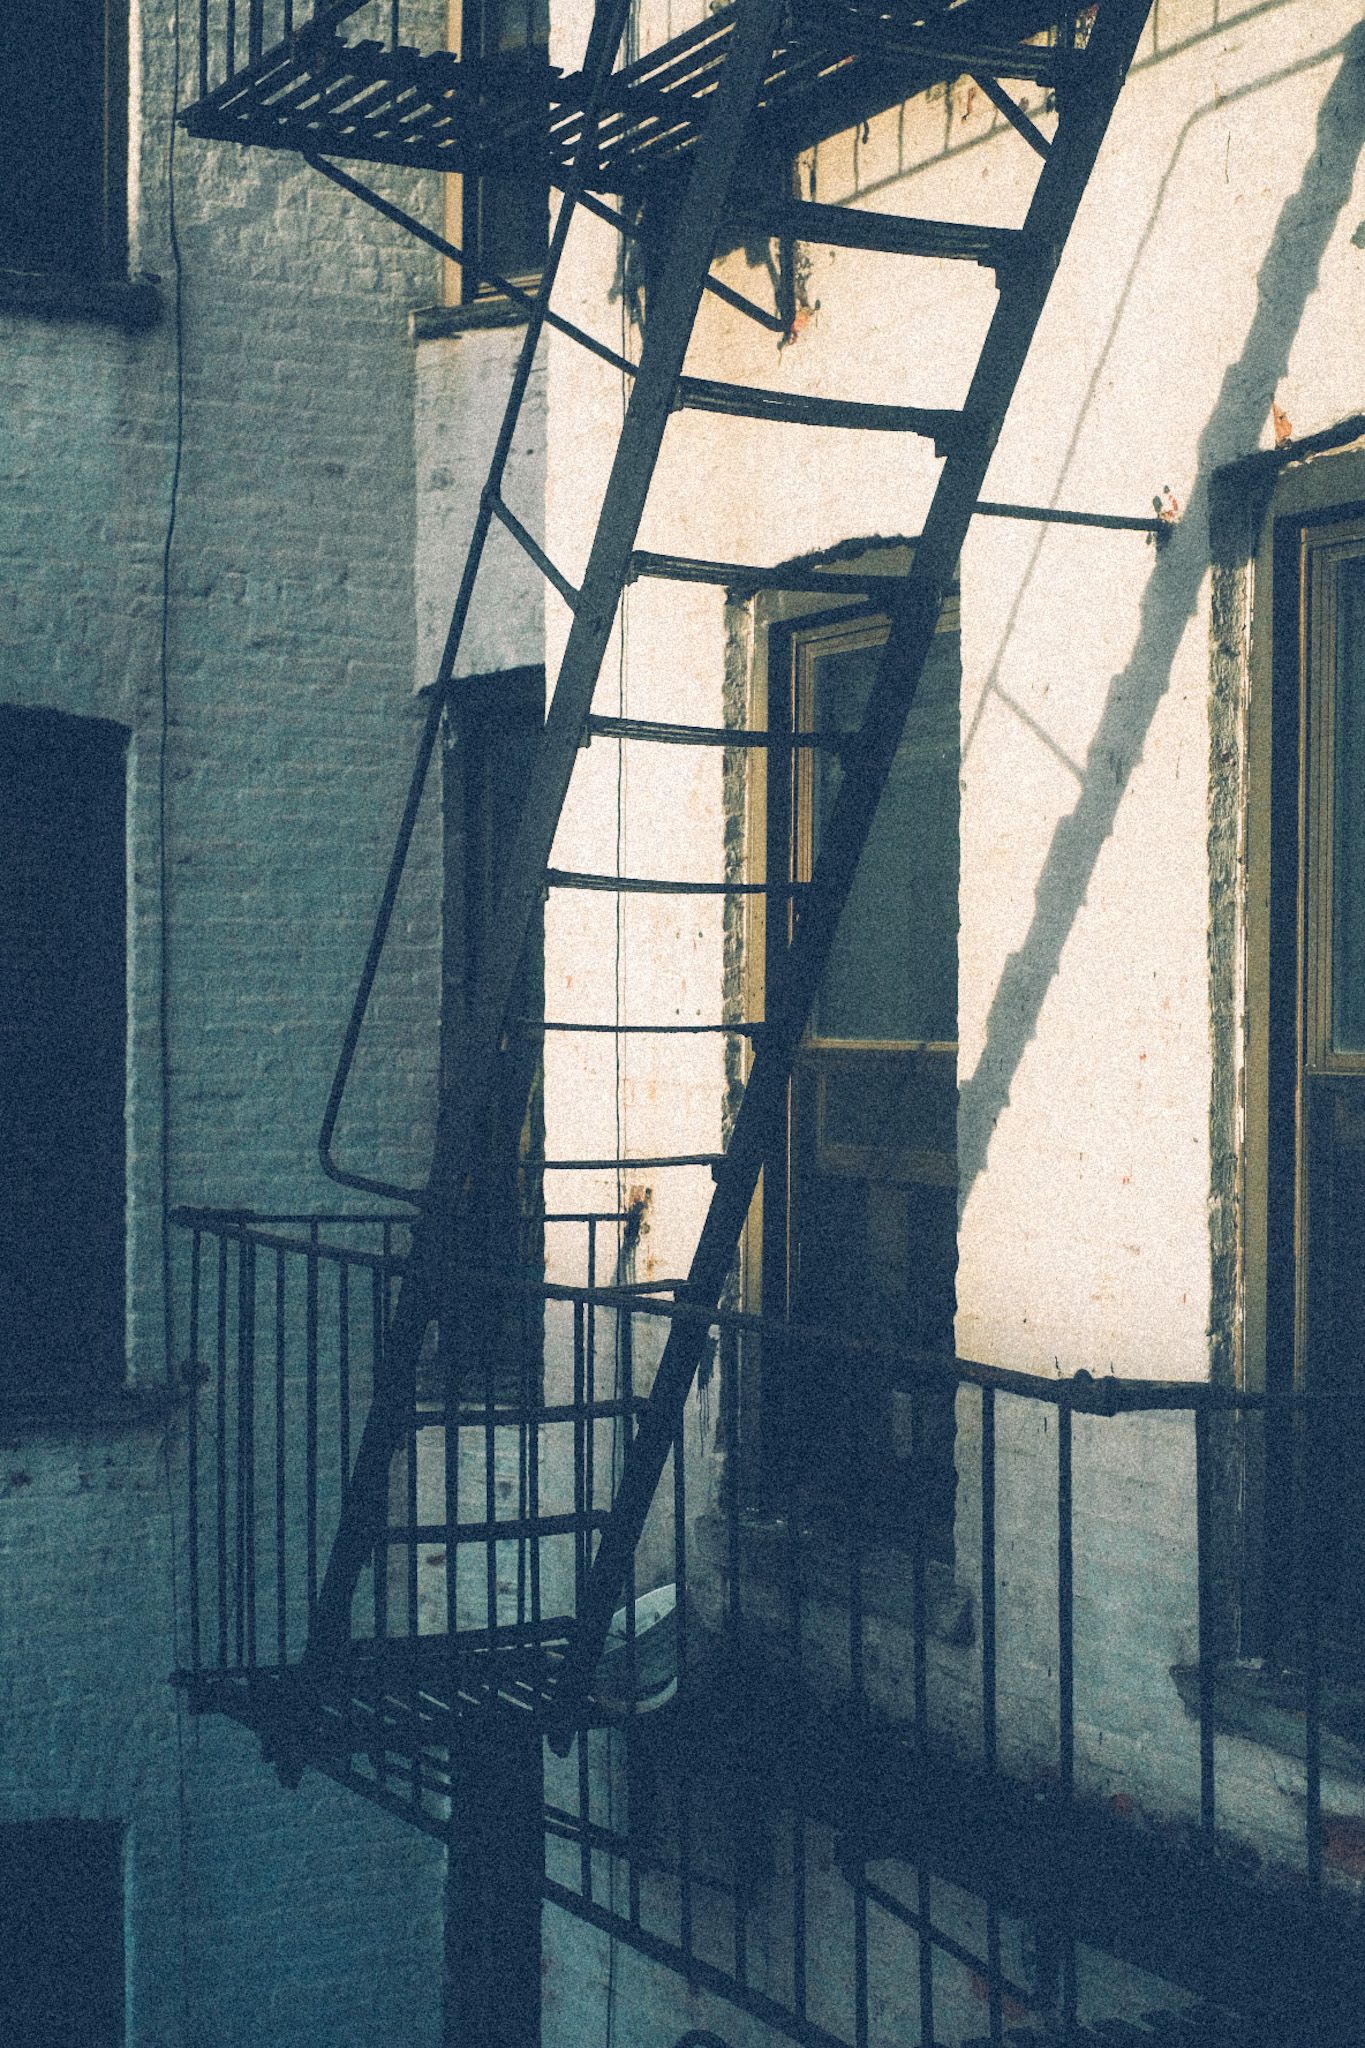 Outside of an apartment window, a black fire escape is Tatar he’d to a white brick building, windows scaling downward, lit with light of the near sunset.